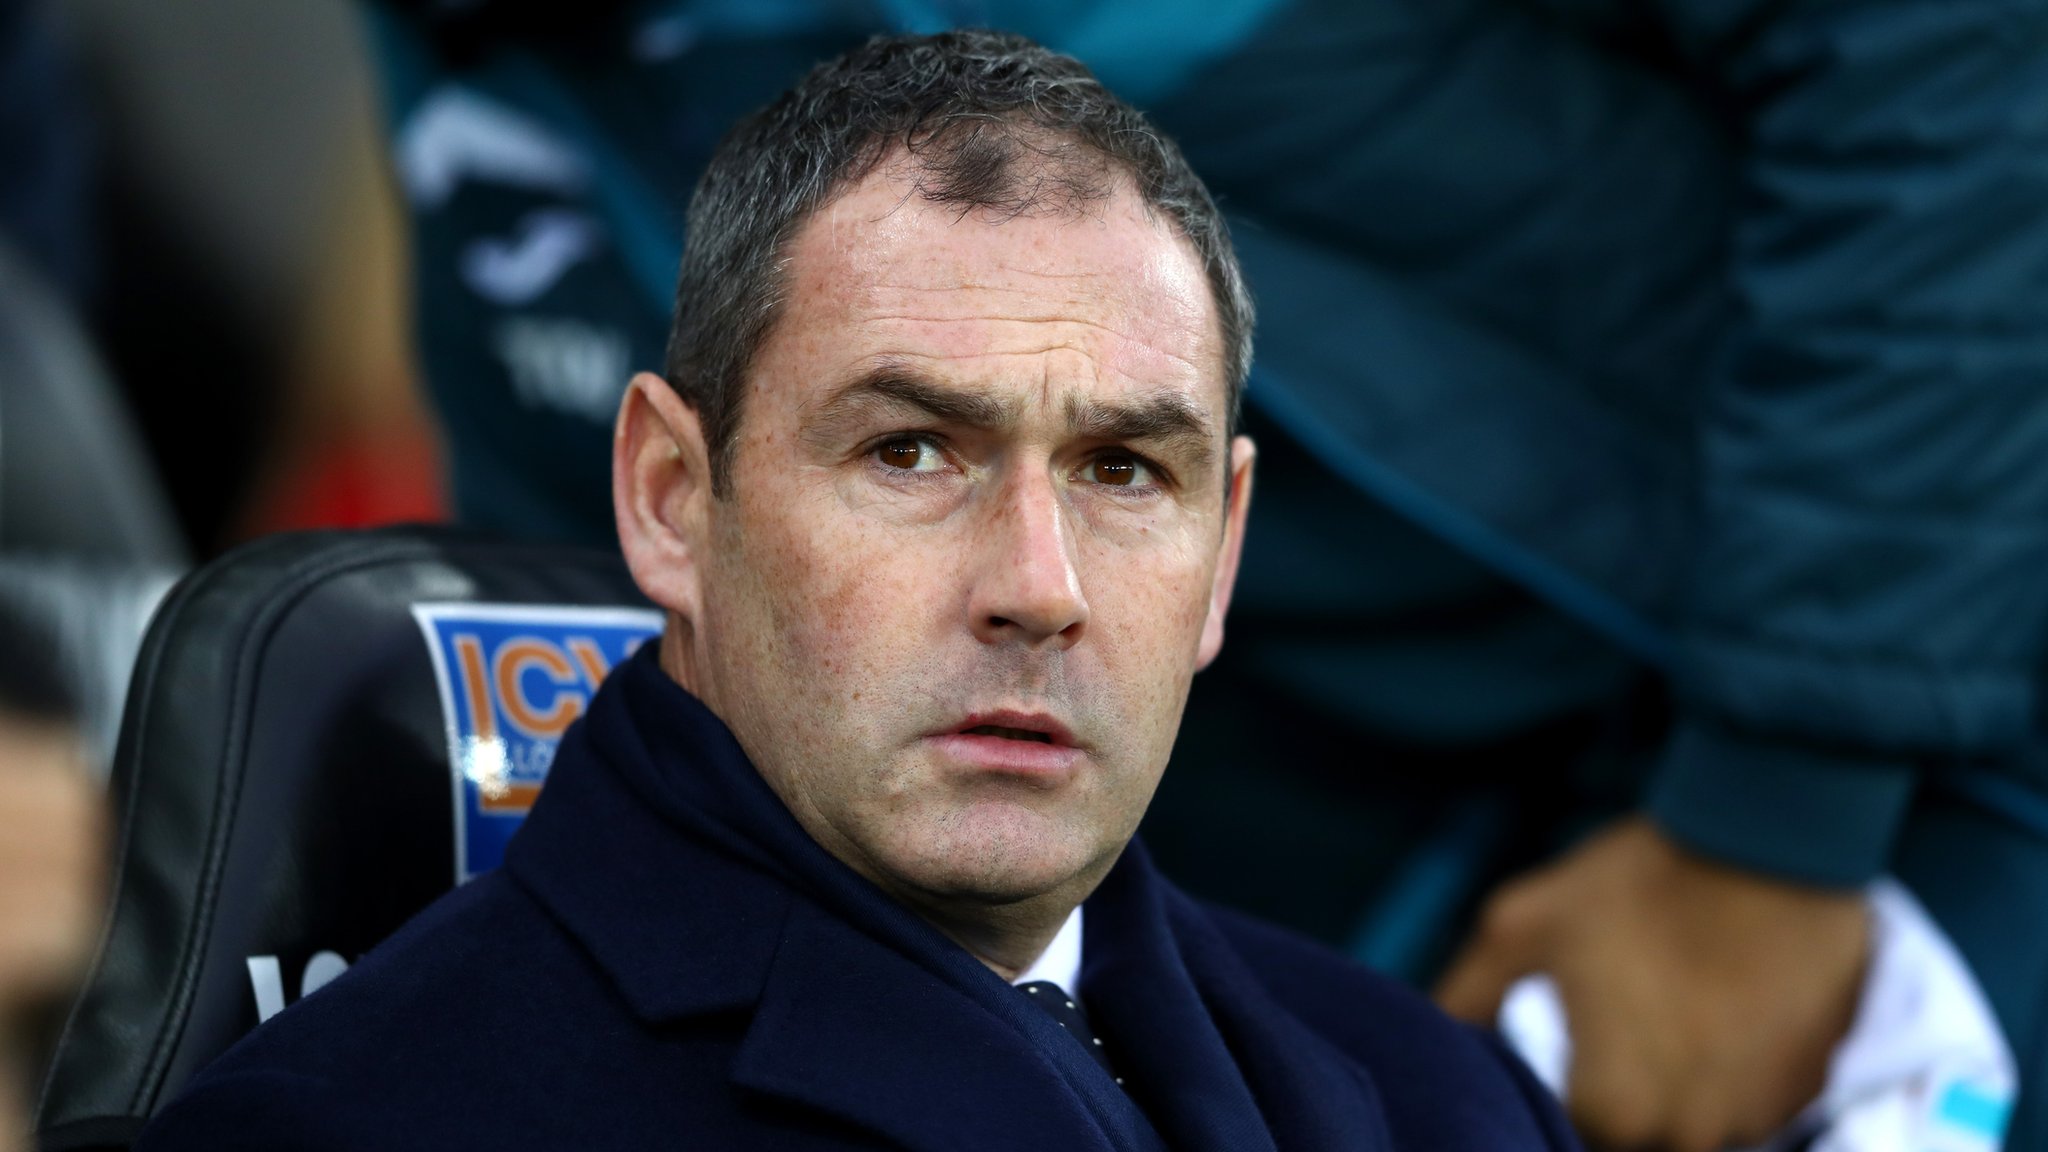 Managing Swansea was 'very challenging' - Clement